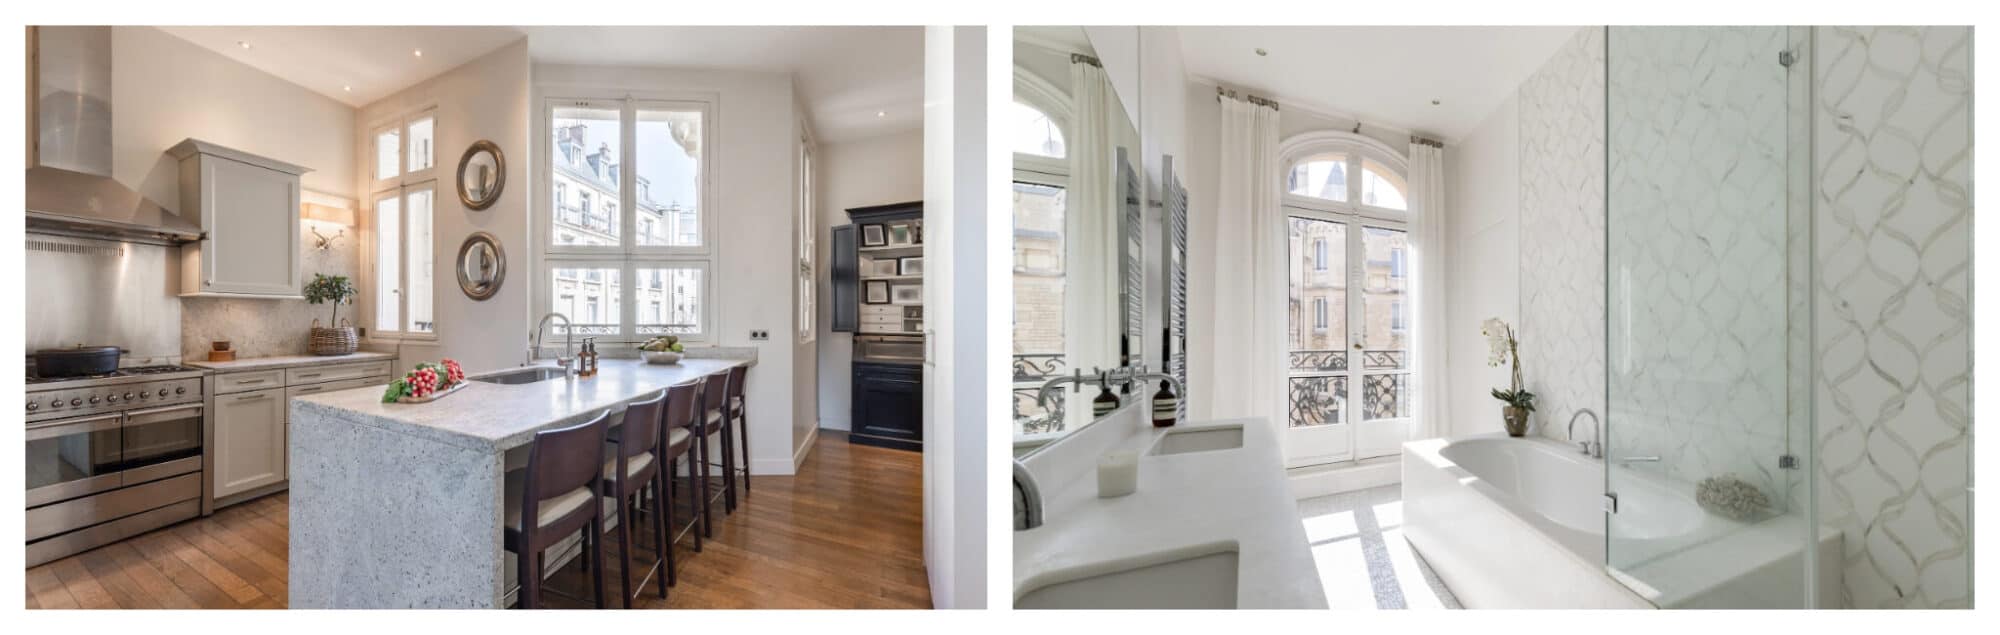 Left: a small kitchen in a Paris apartment with a stone island in the middle, wooden floors and a 3 large windows looking onto classic Parisian buildings; Right: a newly remodeled bathroom with a white marble double sink, white bathtub, white and grey patterned wallpaper, a large window with white curtains looking onto the historic buildings of the Marais.